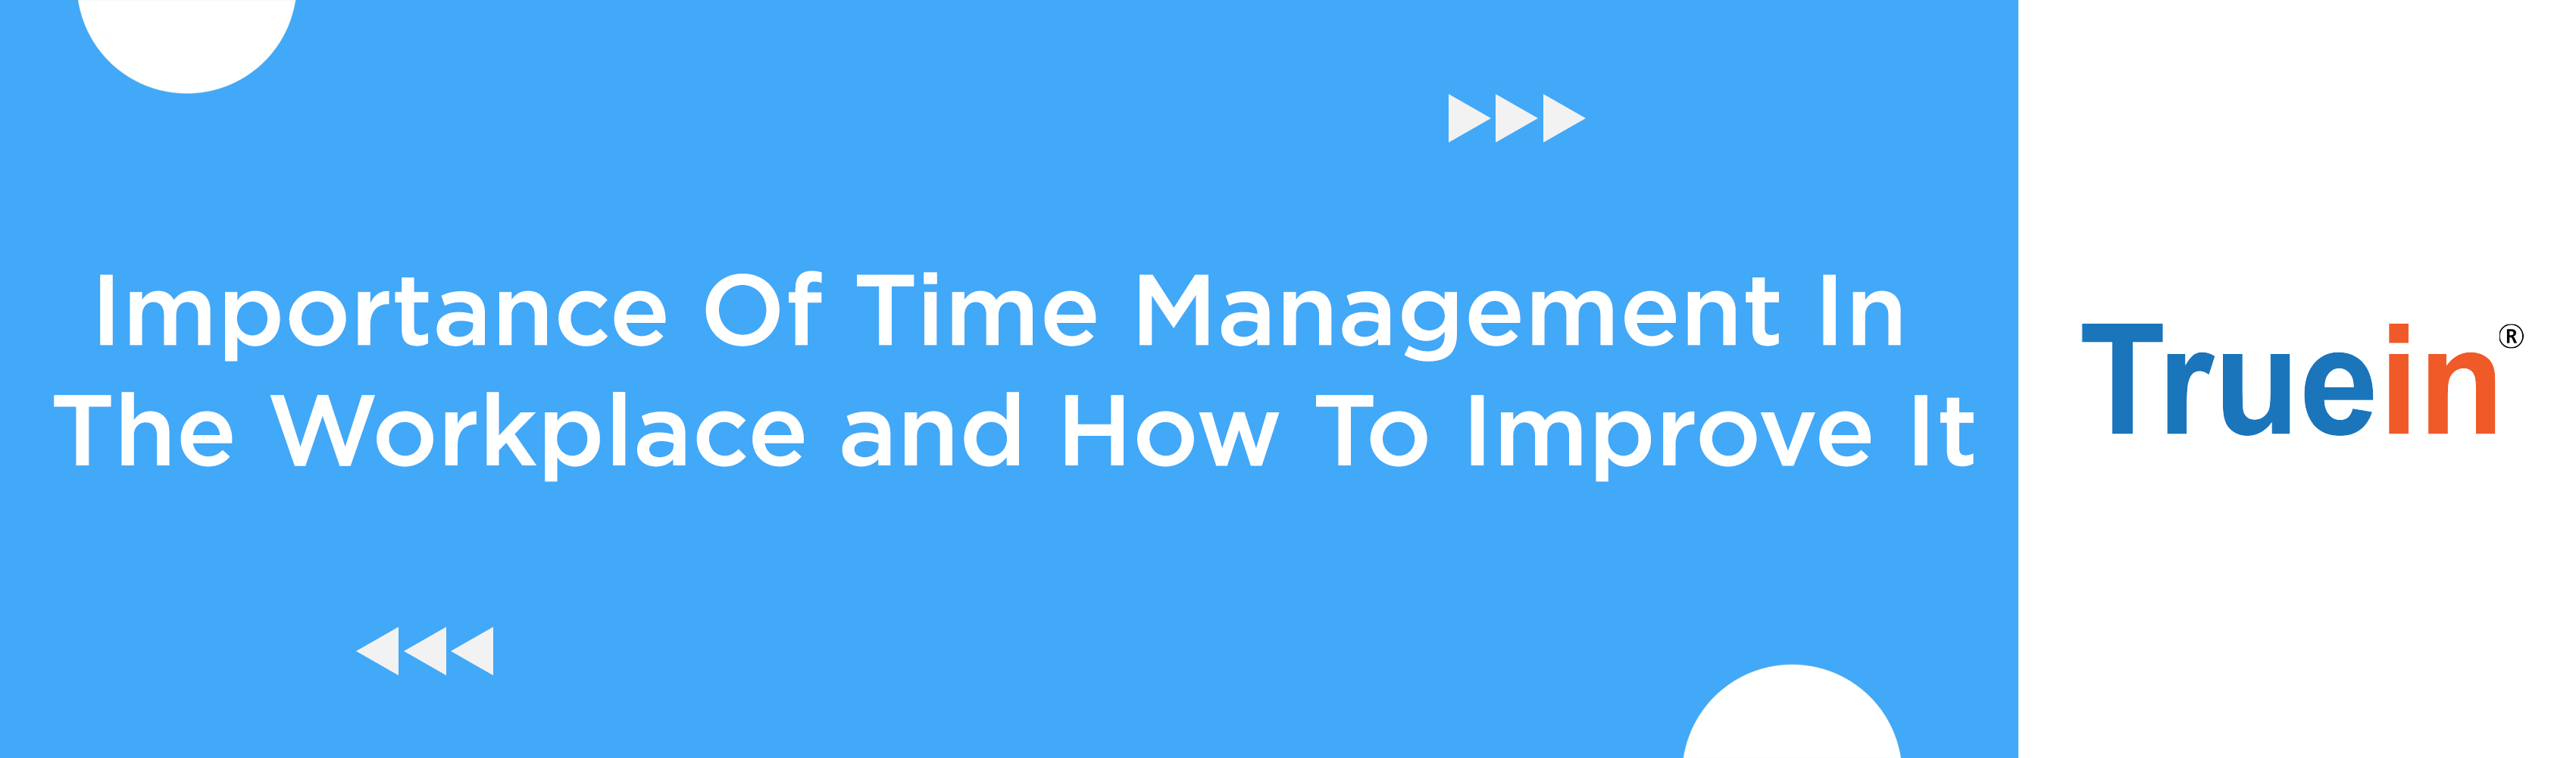 Importance Of Time Management In The Workplace and How To Improve It